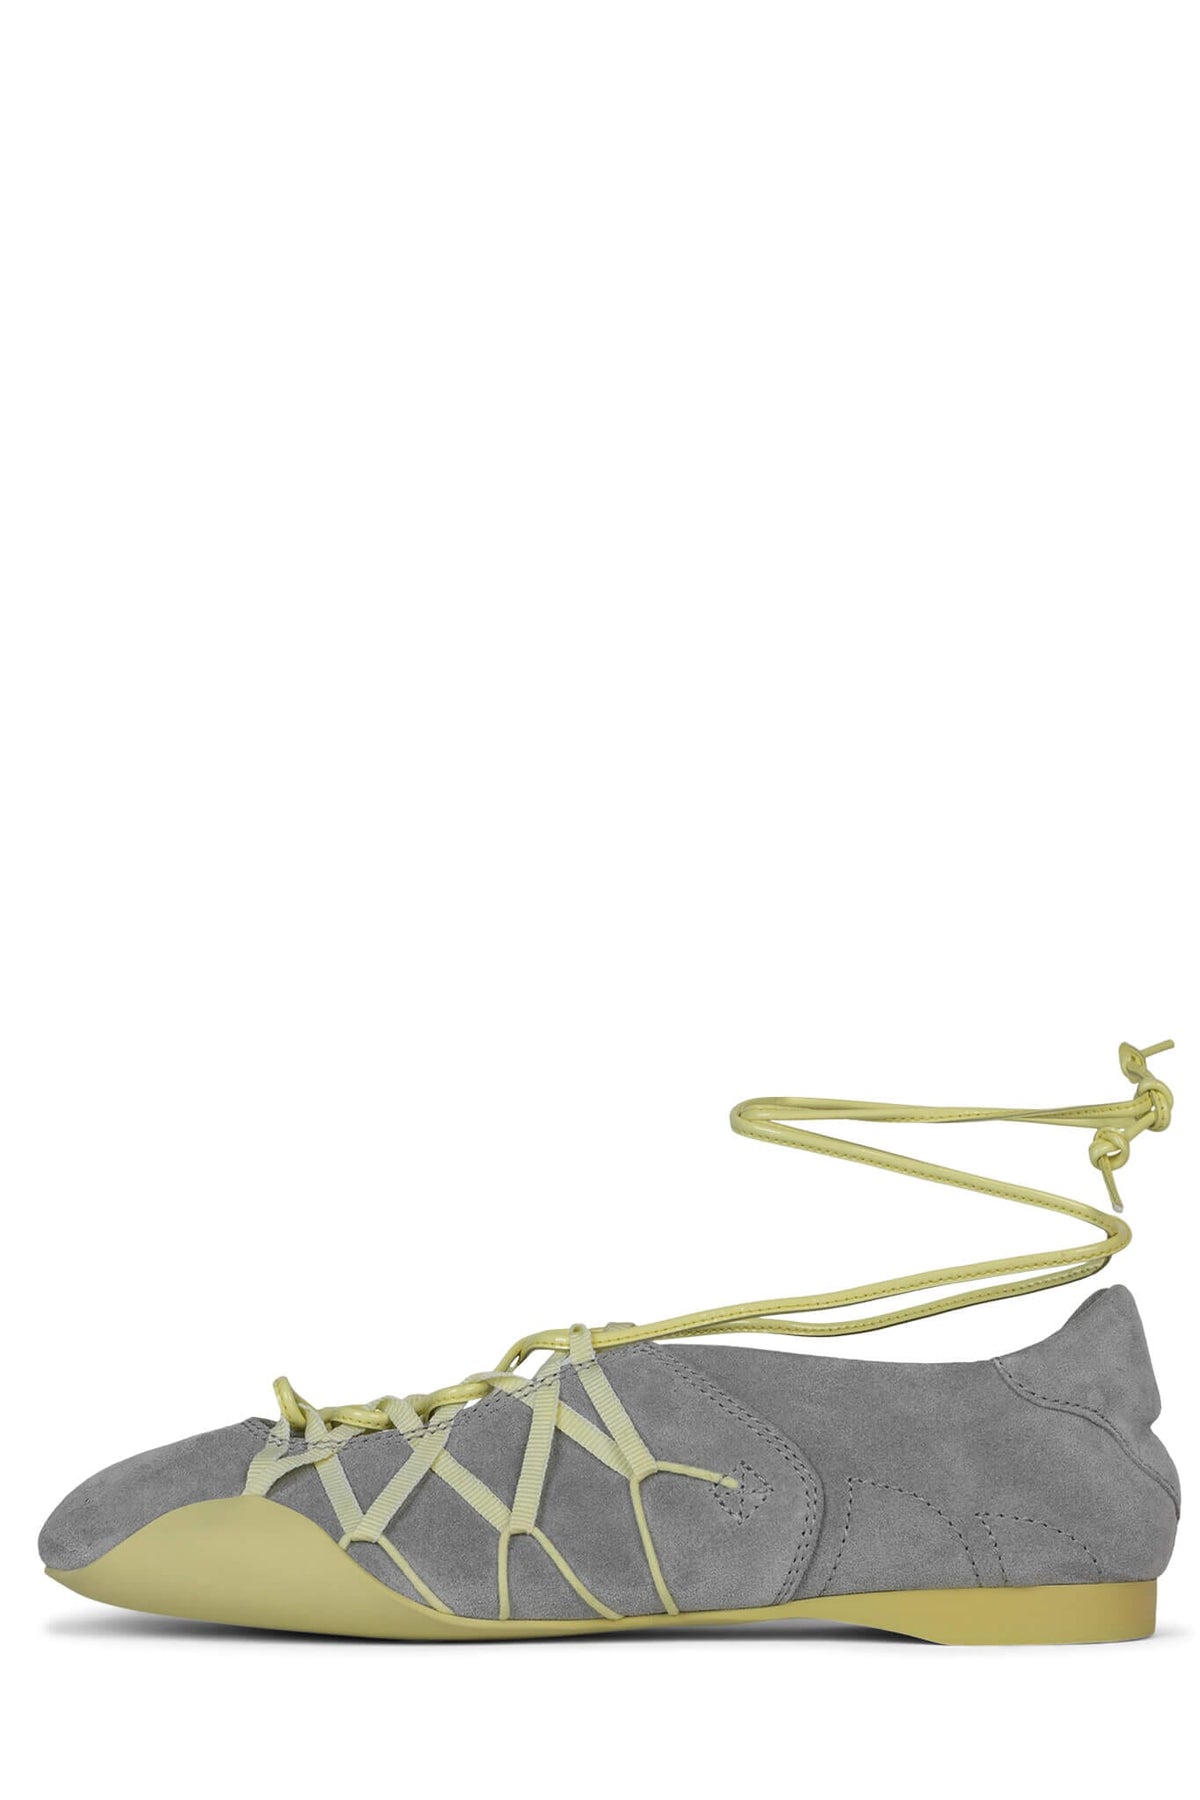 M-V-P Flat DV Grey Suede Neon Yellow Combo 6 